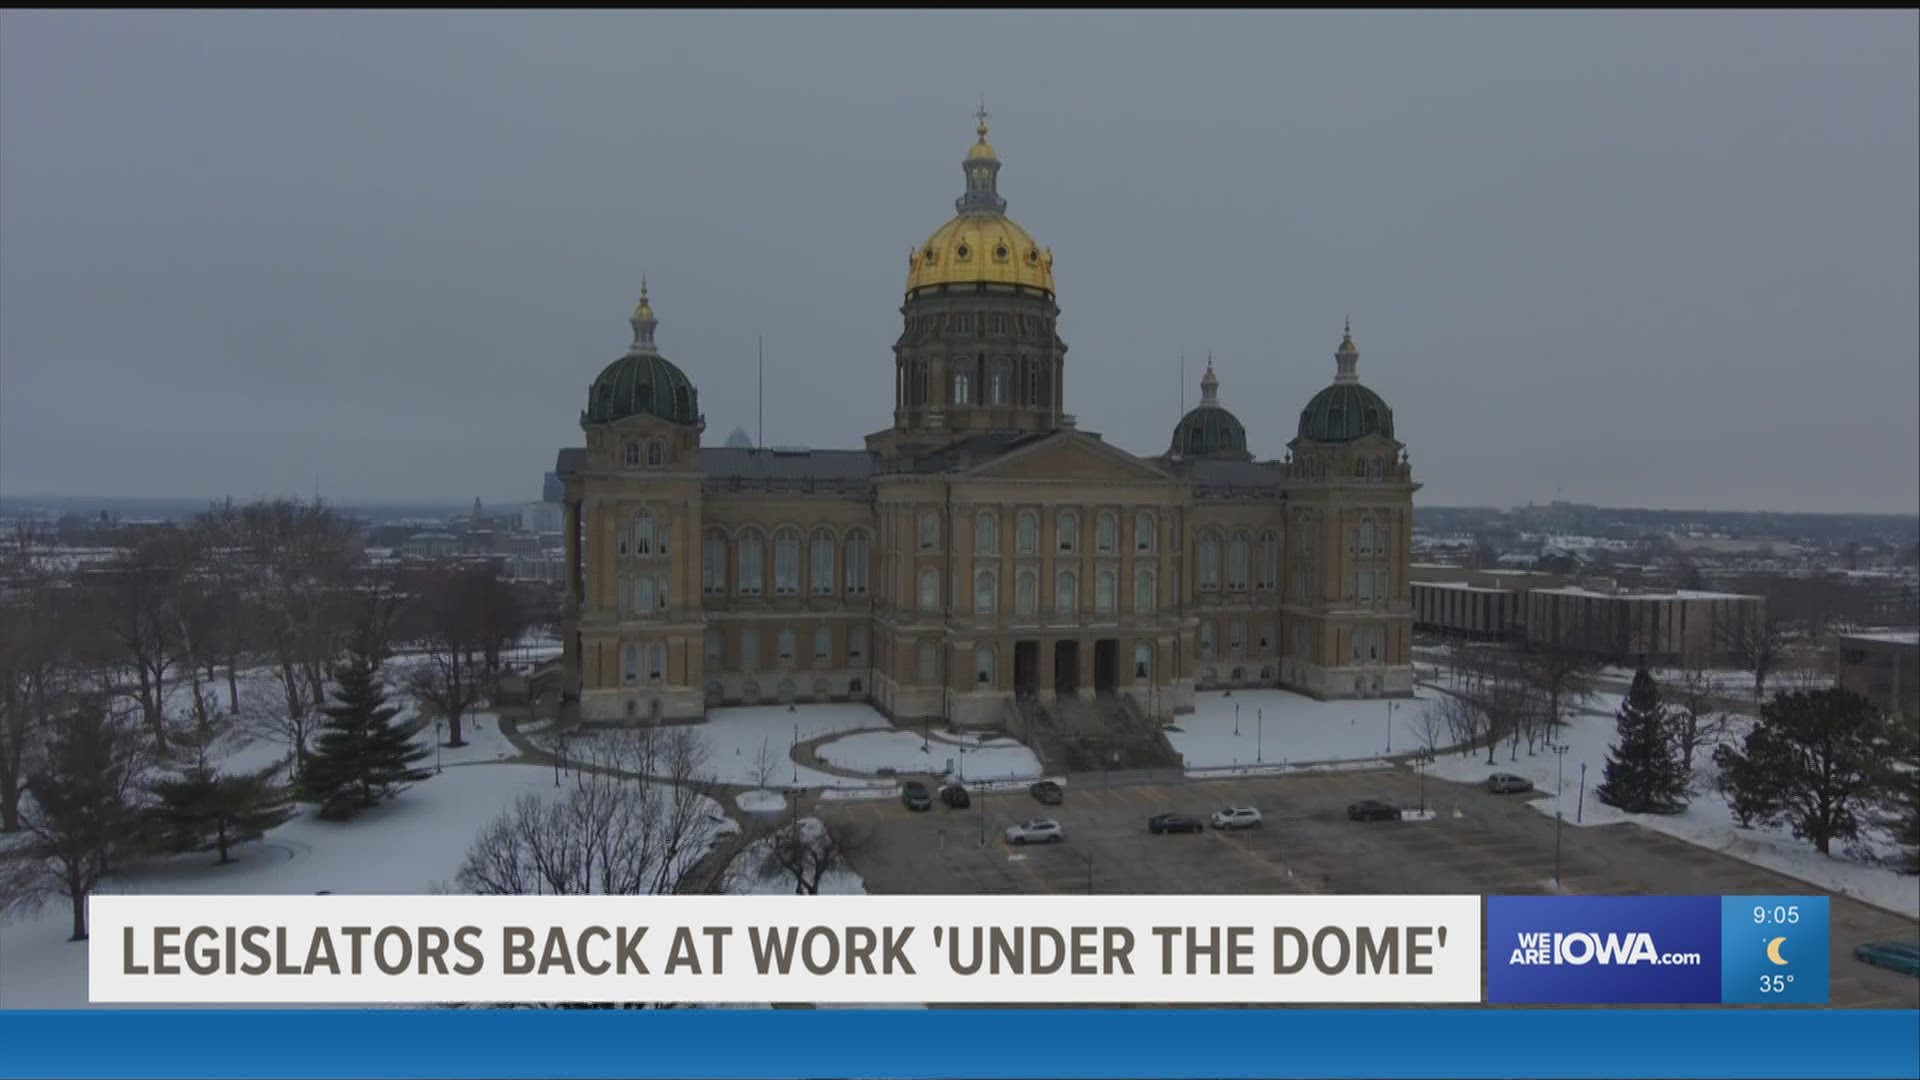 Local 5 digs deeper into the Iowa General Assembly's 2021 session.